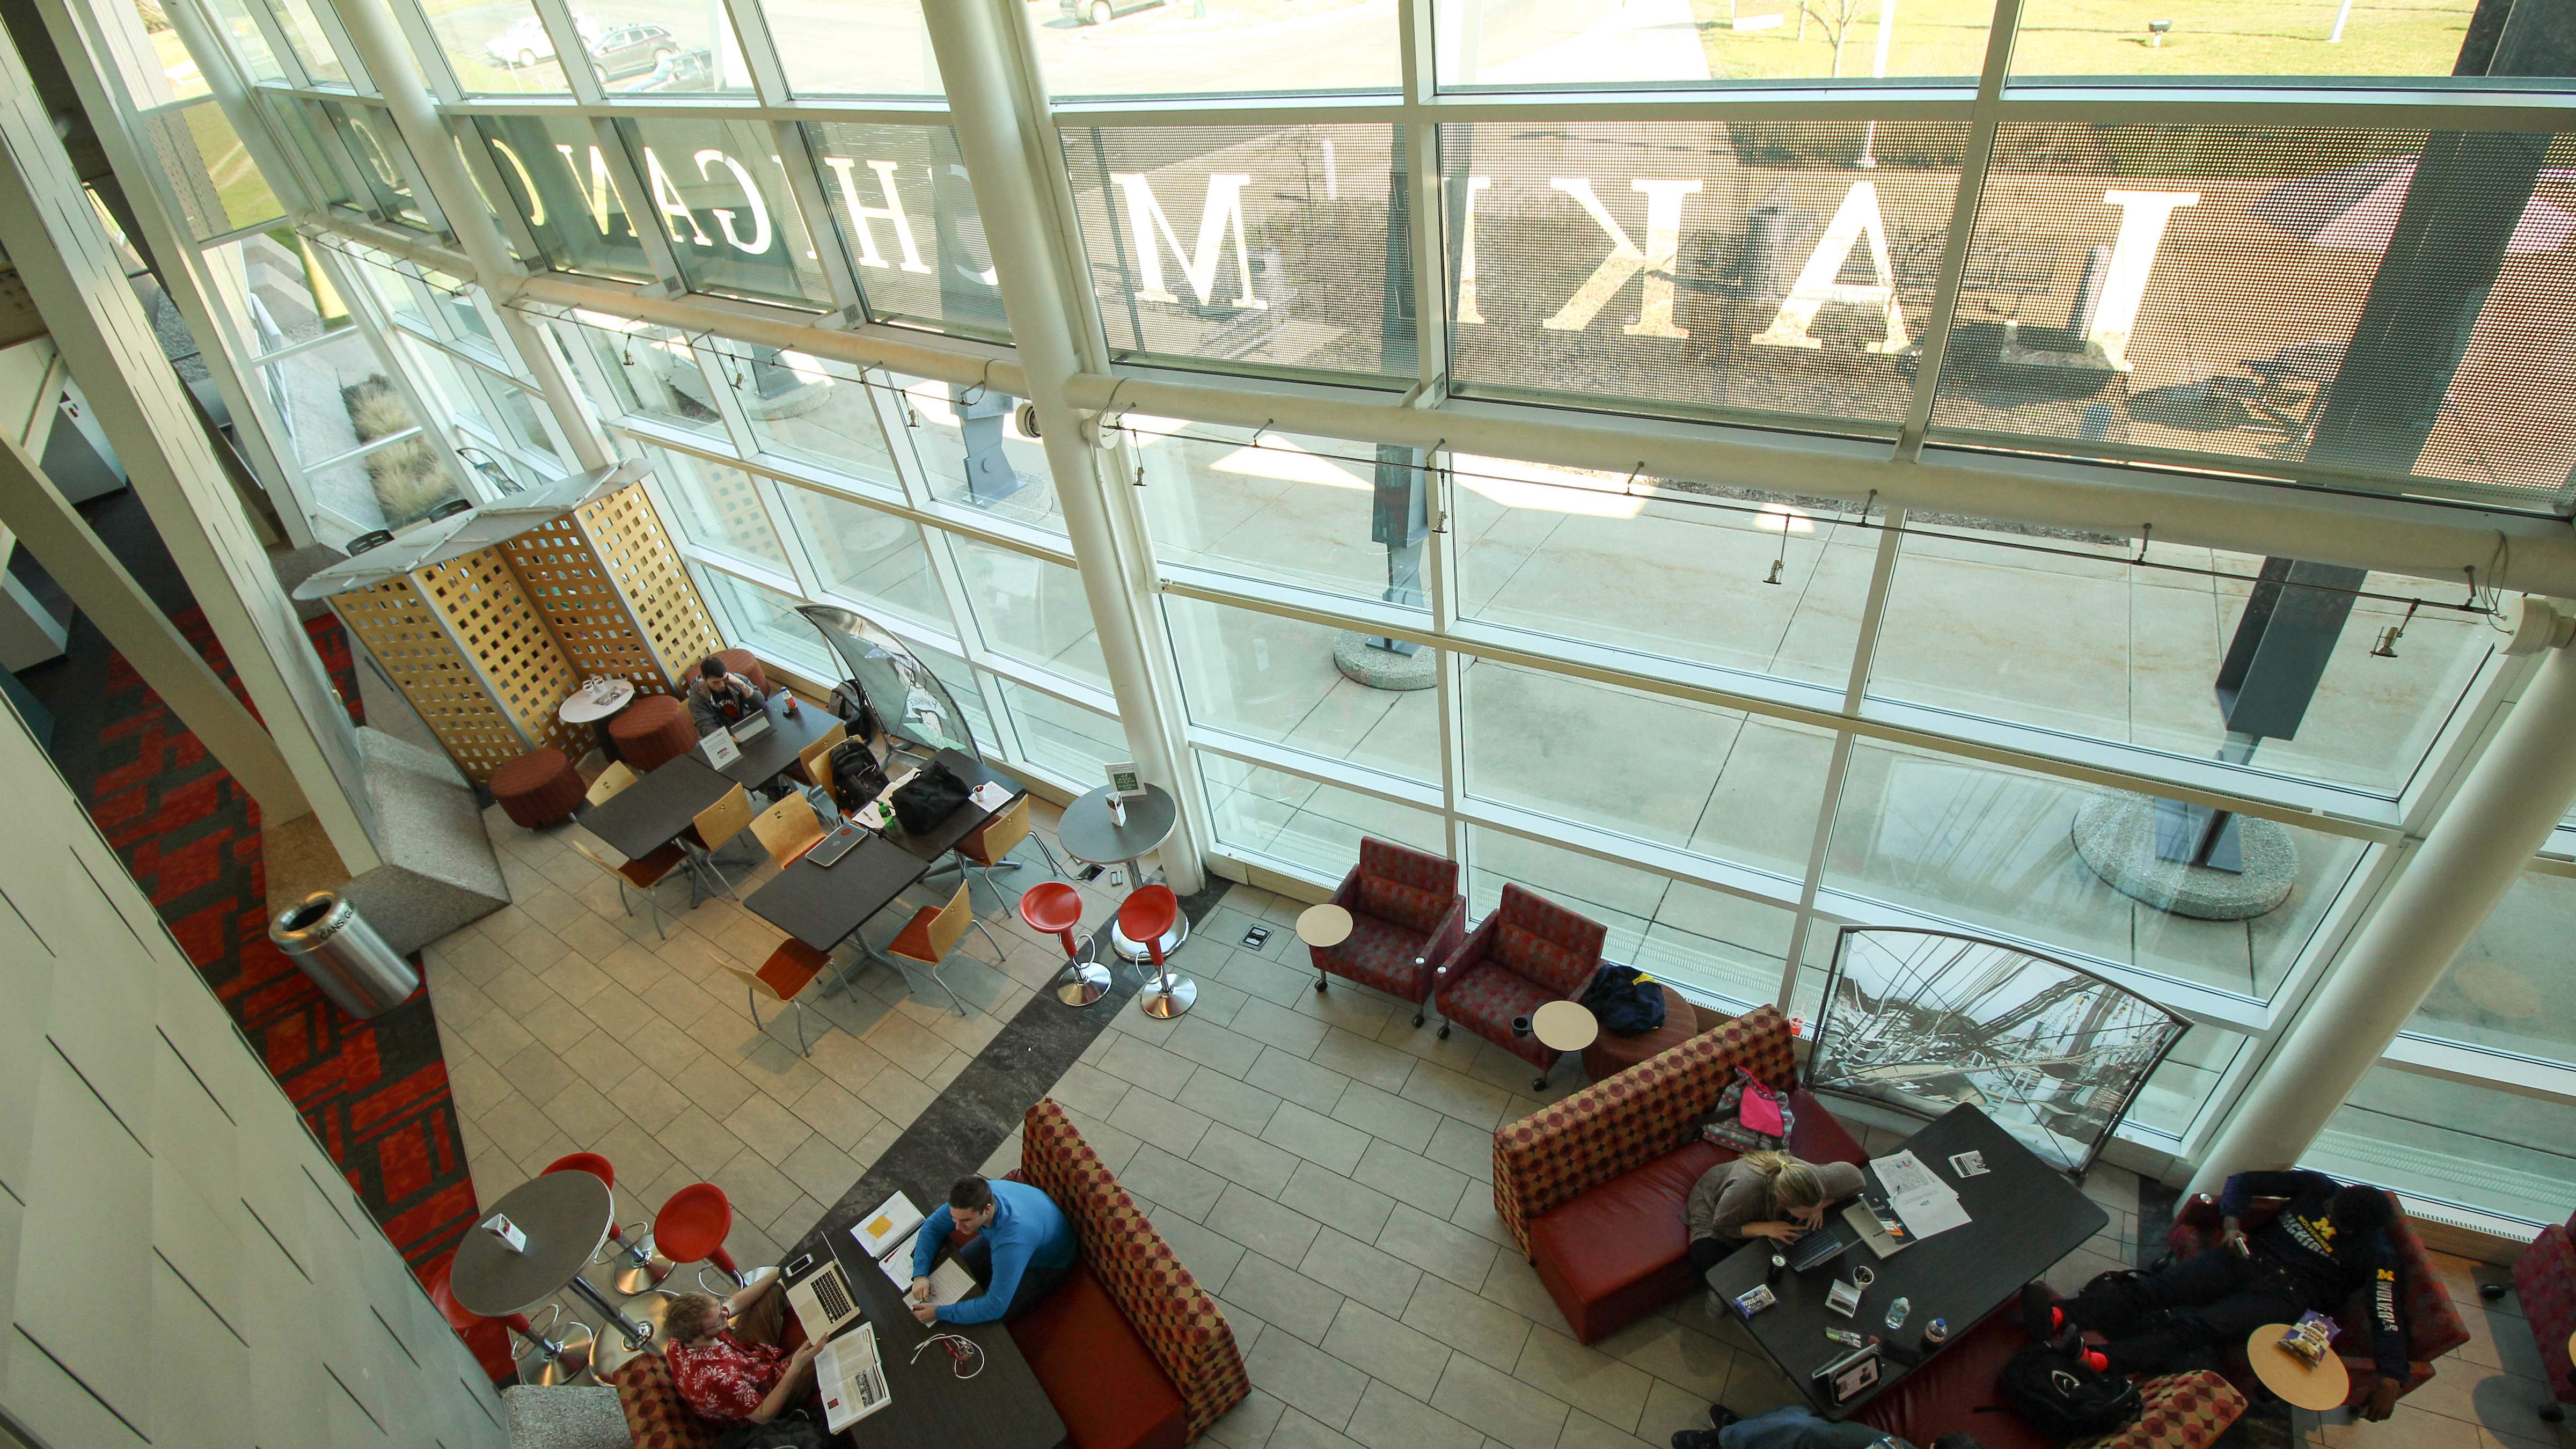 Inside the South Haven Campus lobby